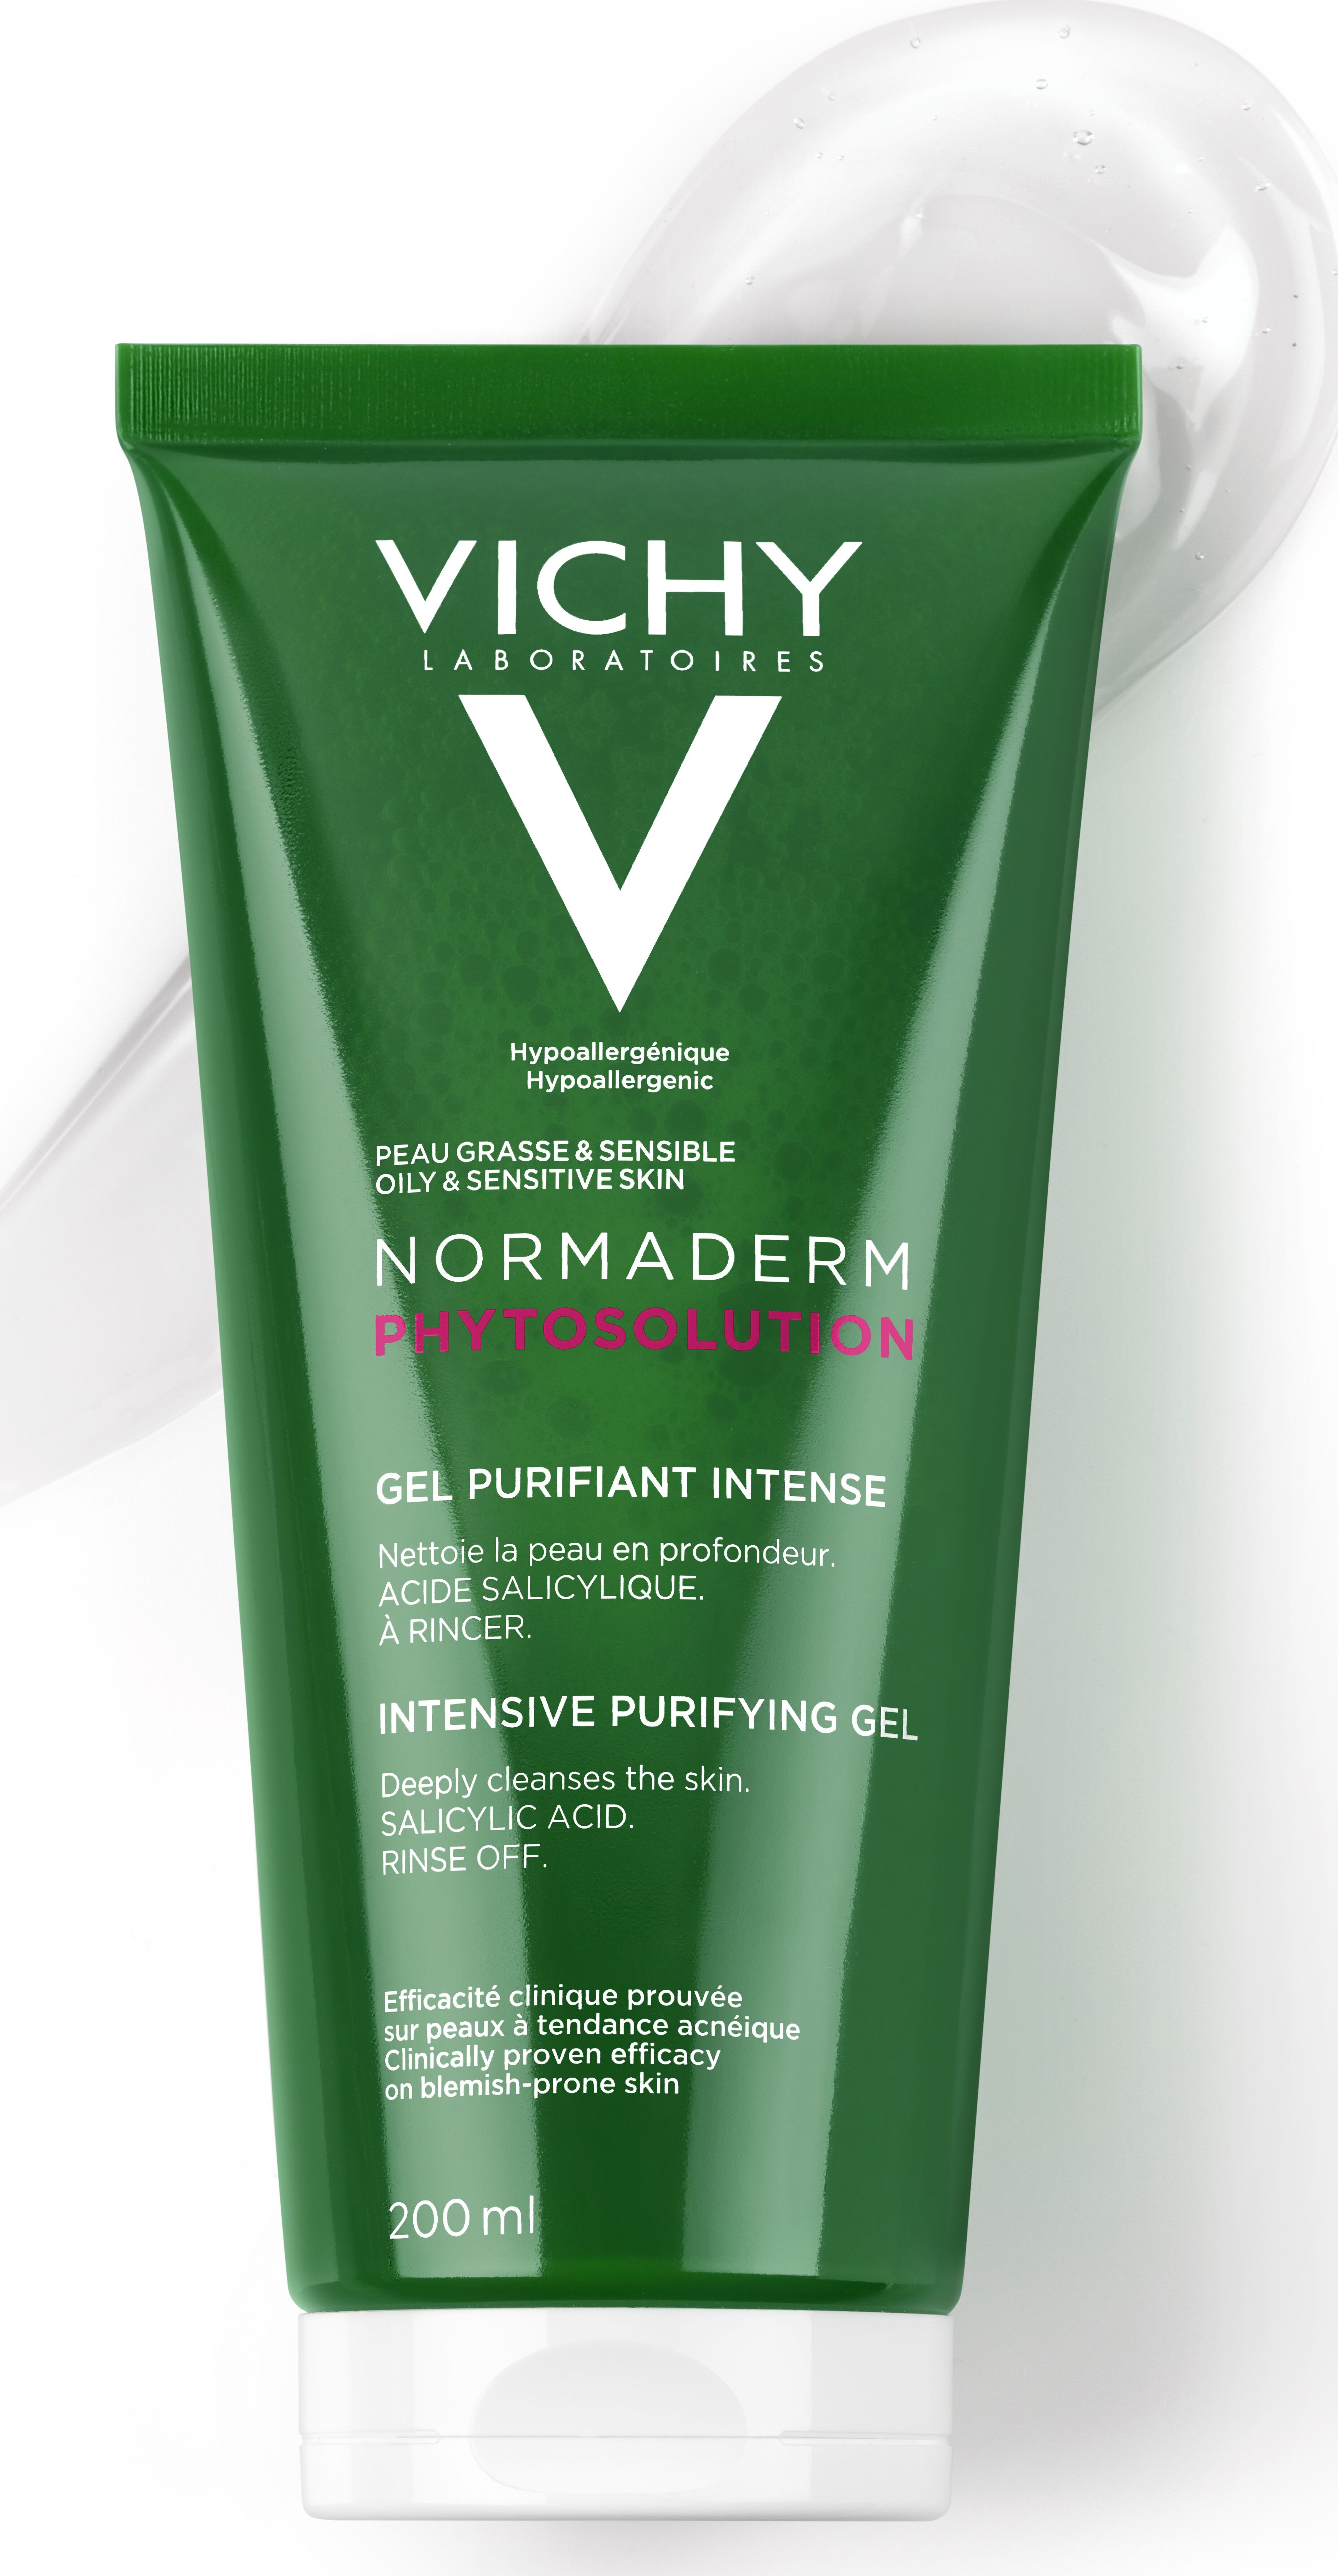 Vichy normaderm phytosolution intensive purifying gel. Vichy Normaderm phytosolution. Vichy Normaderm Gel purifiant intense. Vichy Normaderm phytosolution 15 капсул. Vichy Normaderm Gel purifiant intense Intensive Purifying Gel.